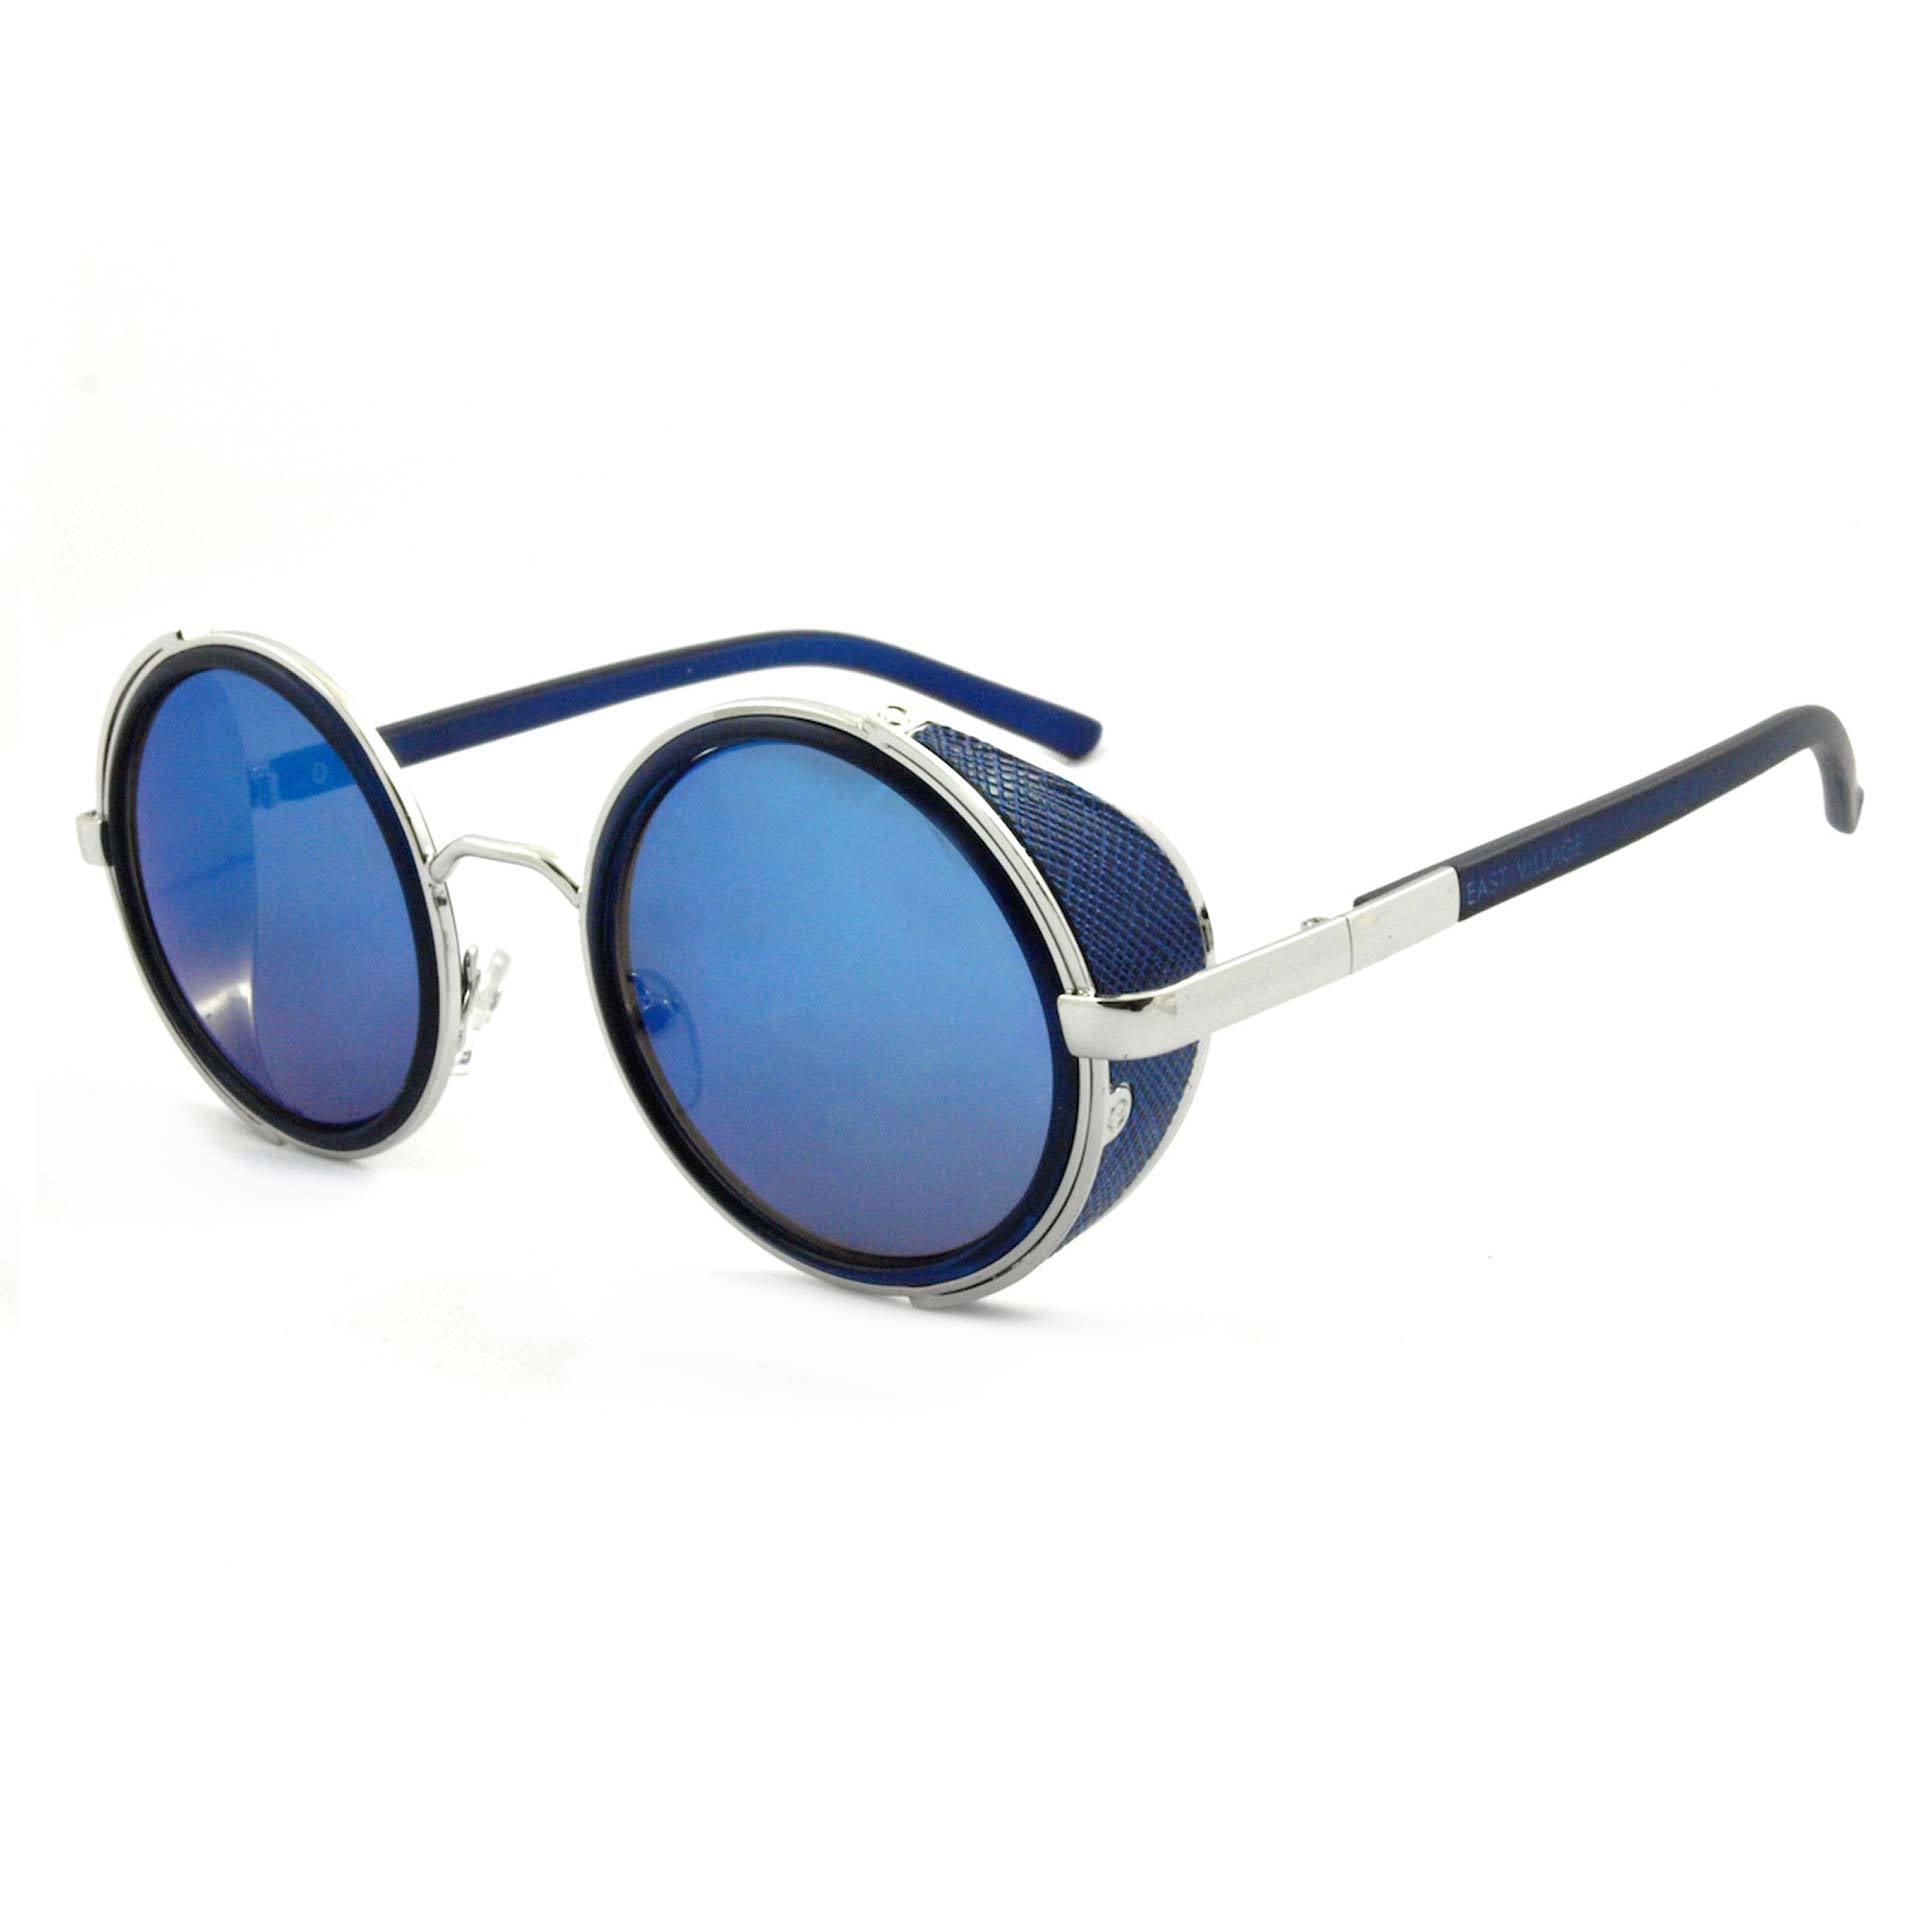 'Freeman' Round Sunglasses With Side Shield In Blue